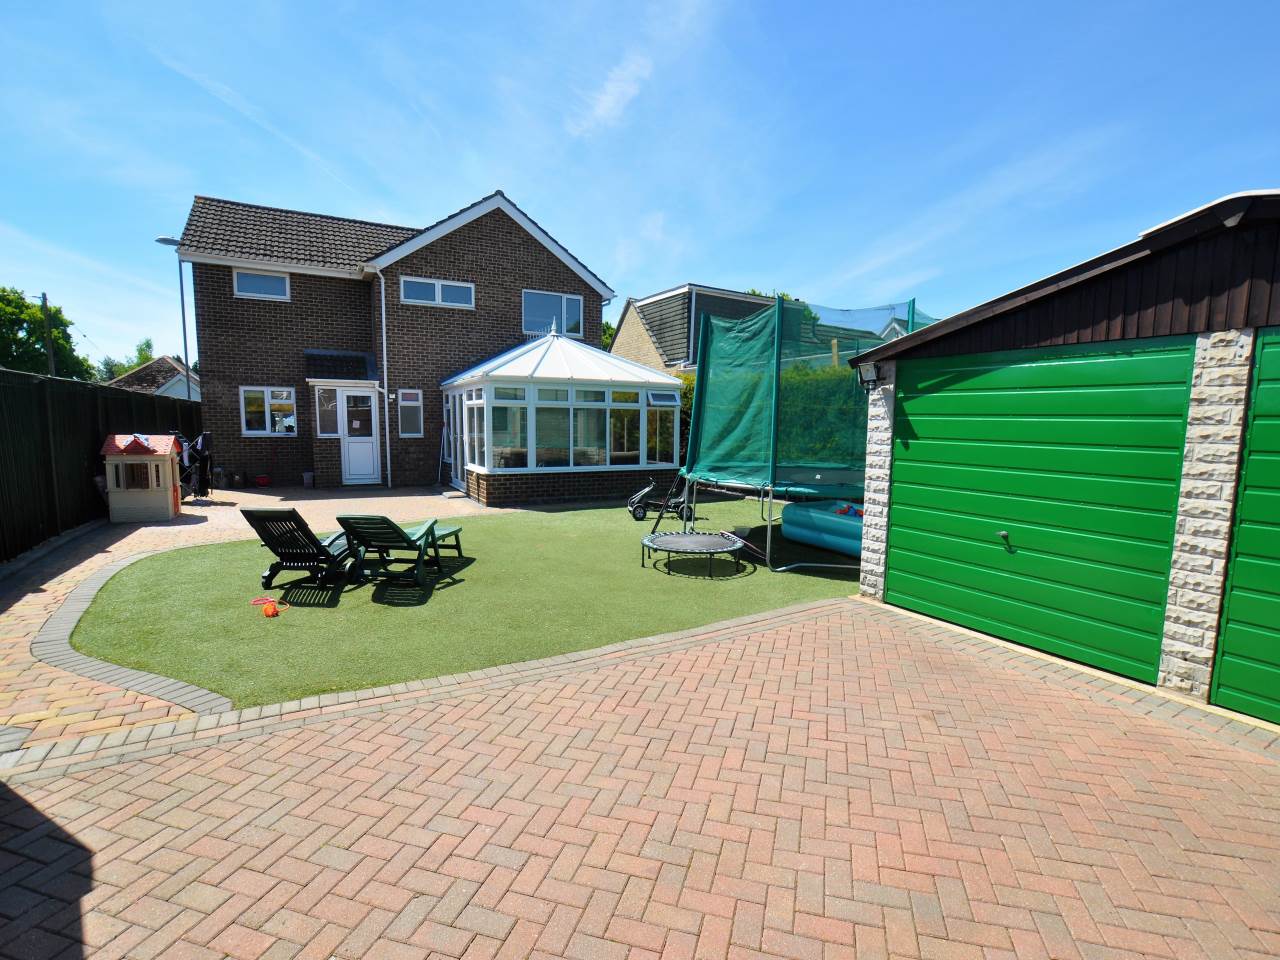 4 bed house for sale in Bunting Road, Ferndown - Property Image 1